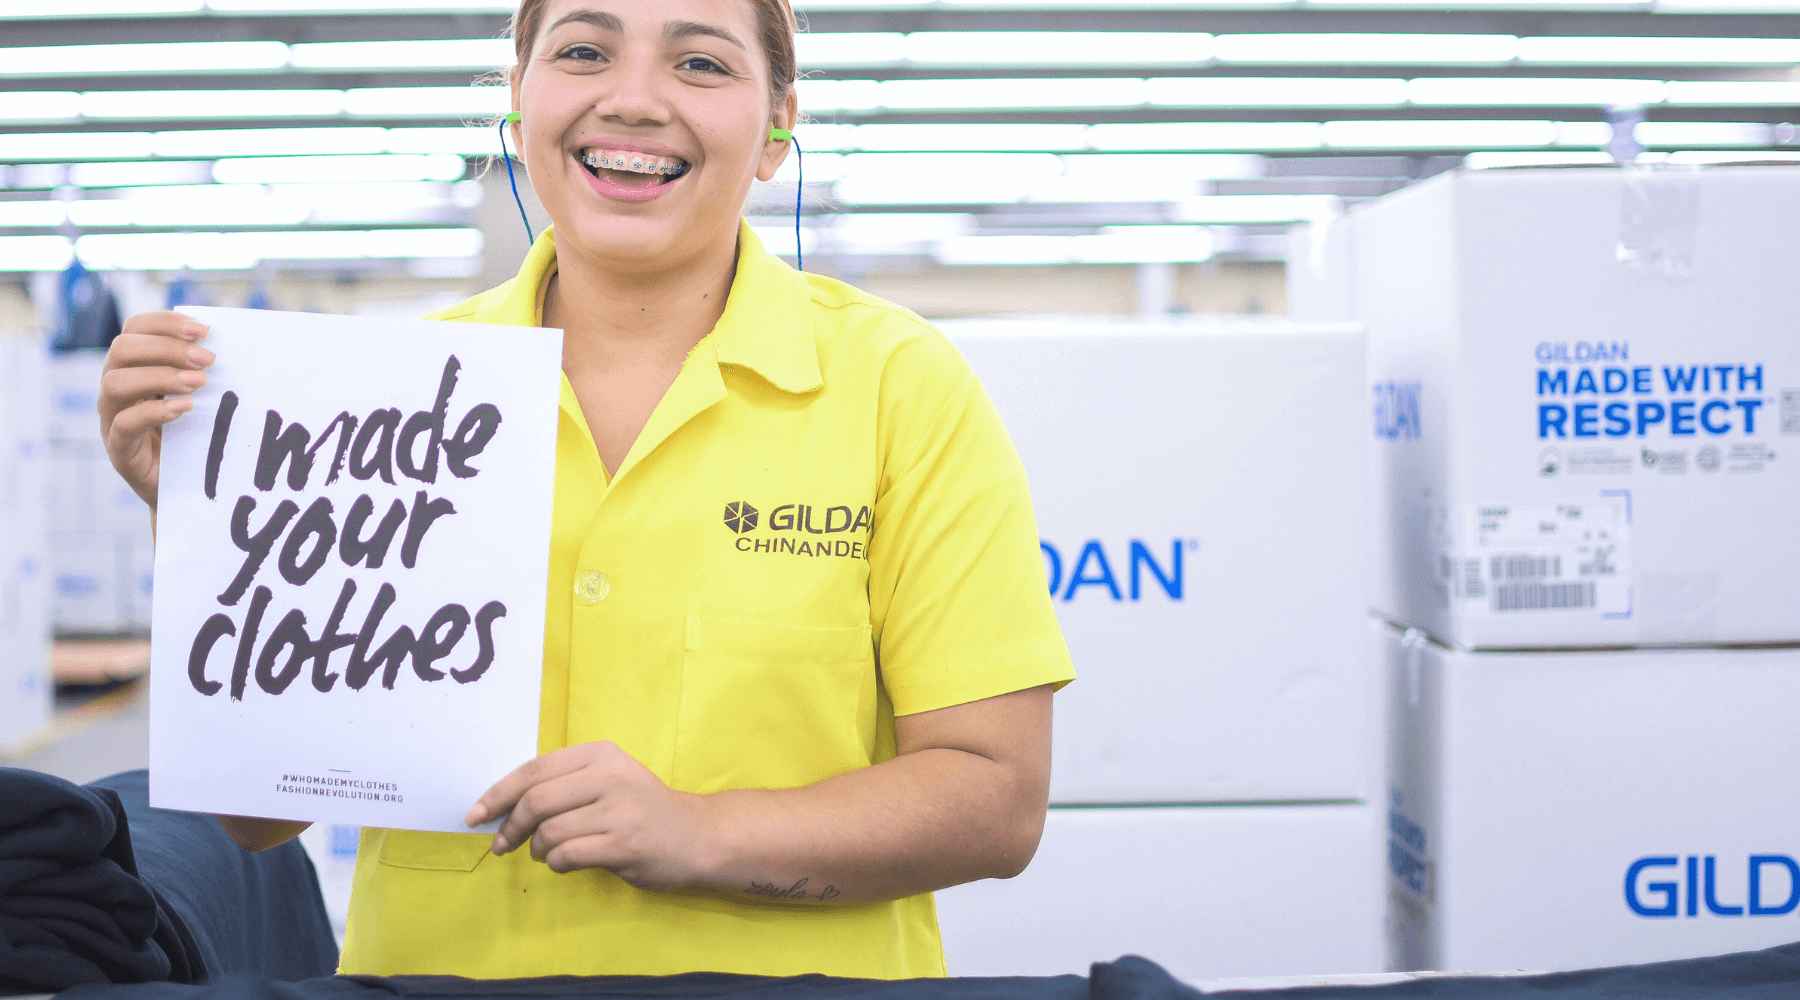 Mariela is smiling and holding a sign that reads “I made your clothes”.